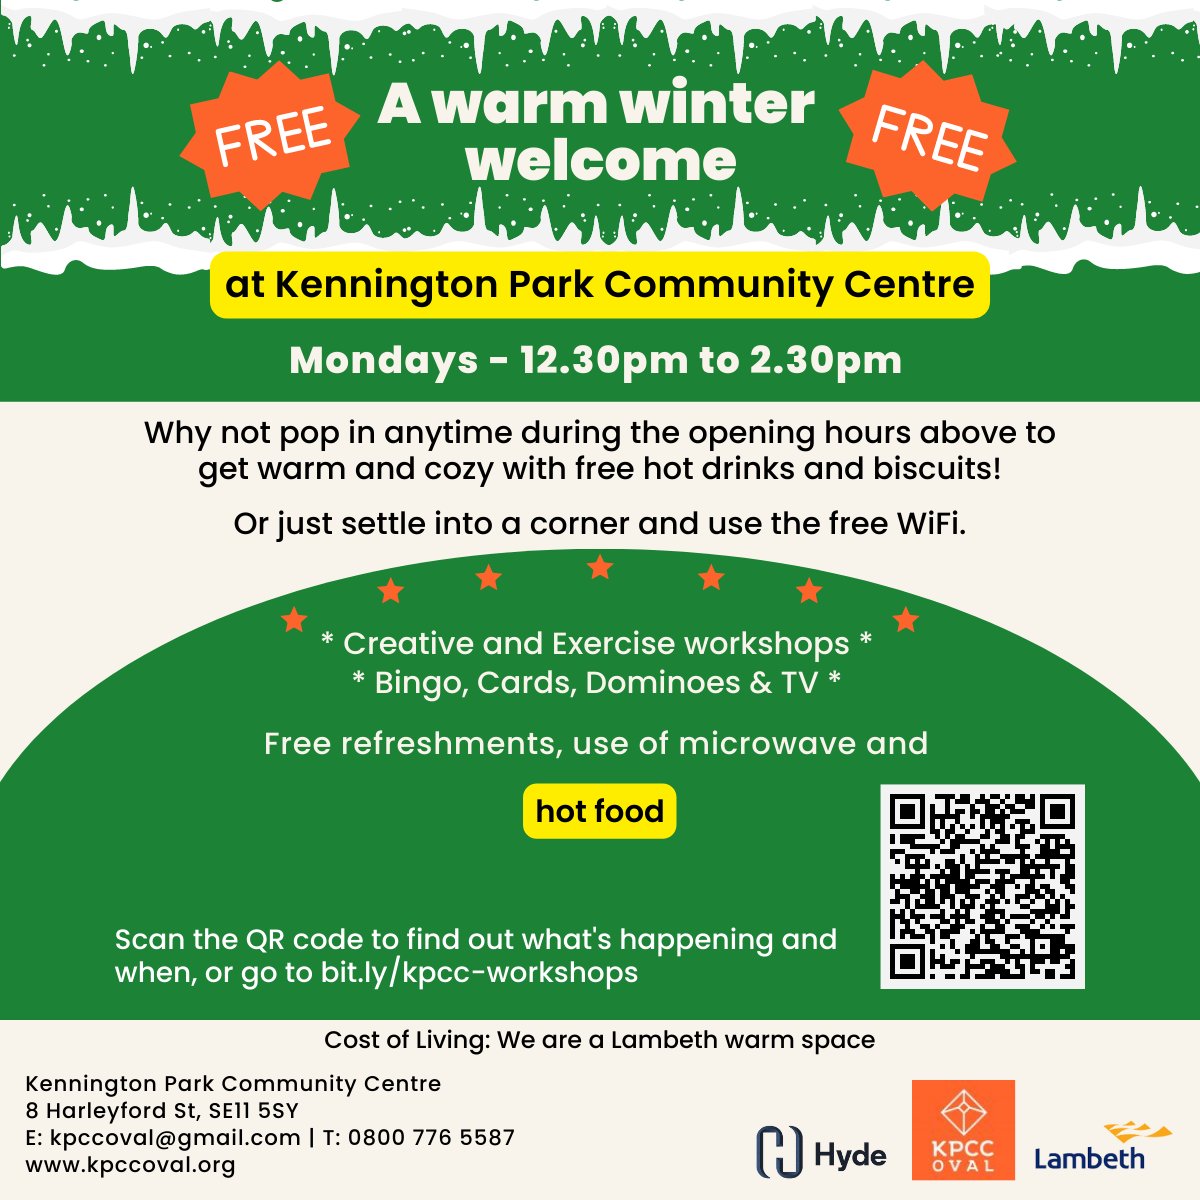 Free hot food, drinks and workshops at Kennington Park Community Centre! Runs until until 27 March 2023. Pop in anytime on Mondays between 12.30pm and 2.30pm for a warm winter welcome! kpccoval.org